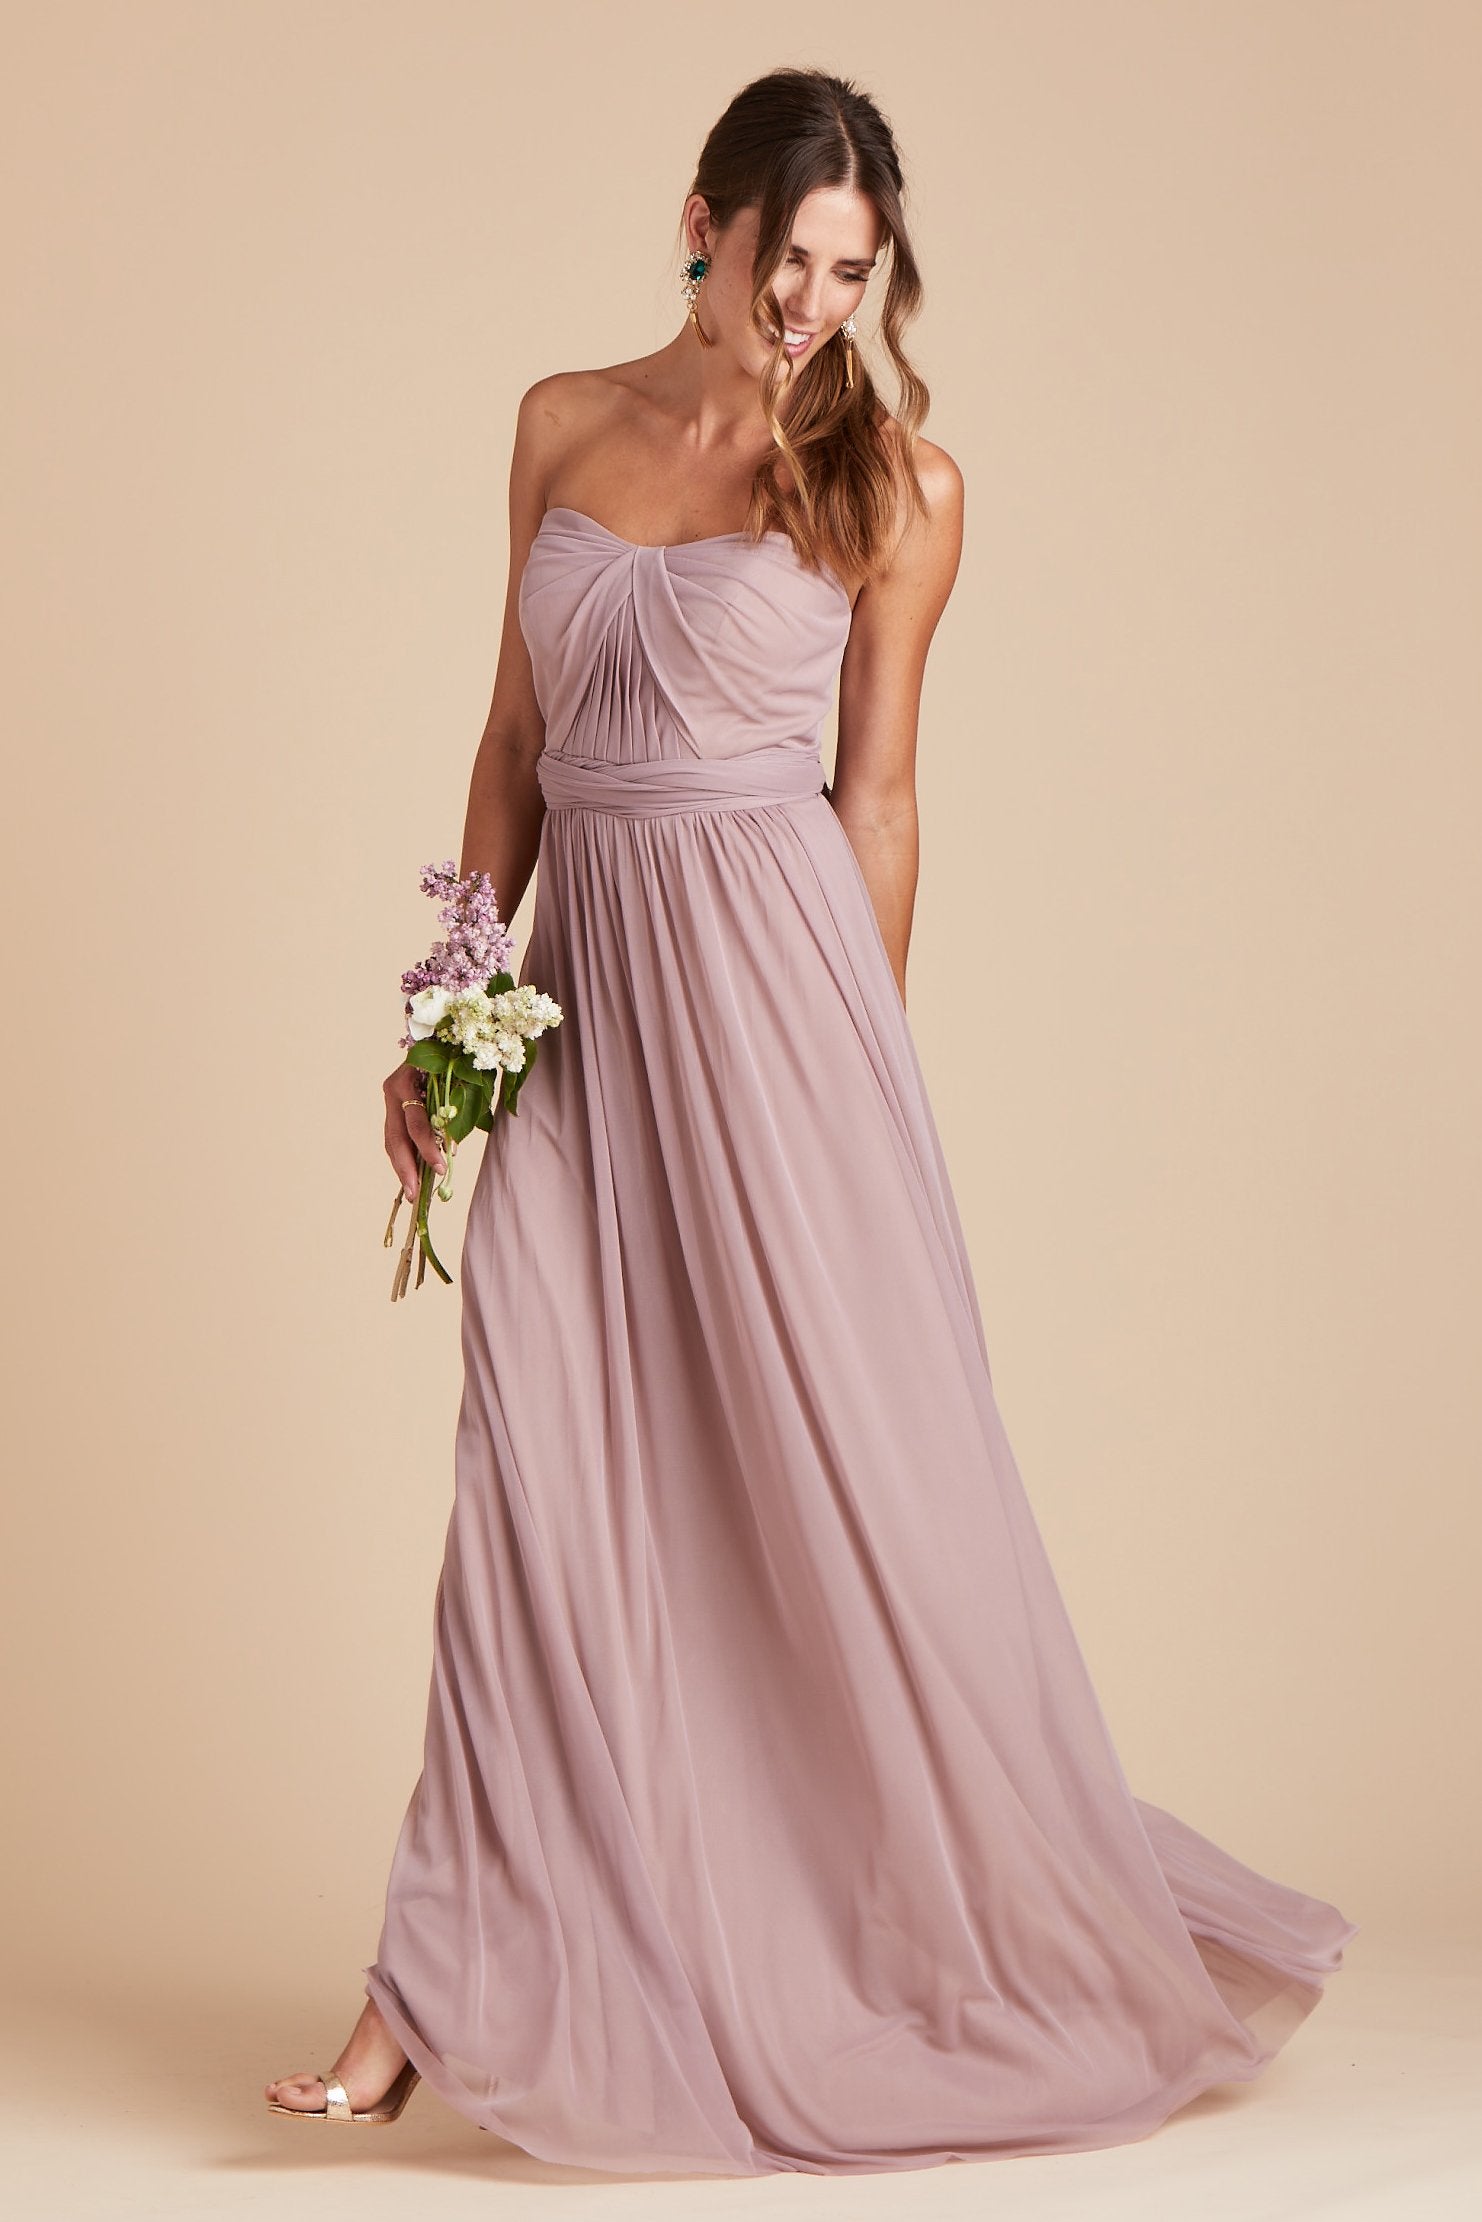 Chicky convertible bridesmaid dress in mauve purple mesh by Birdy Grey, front view